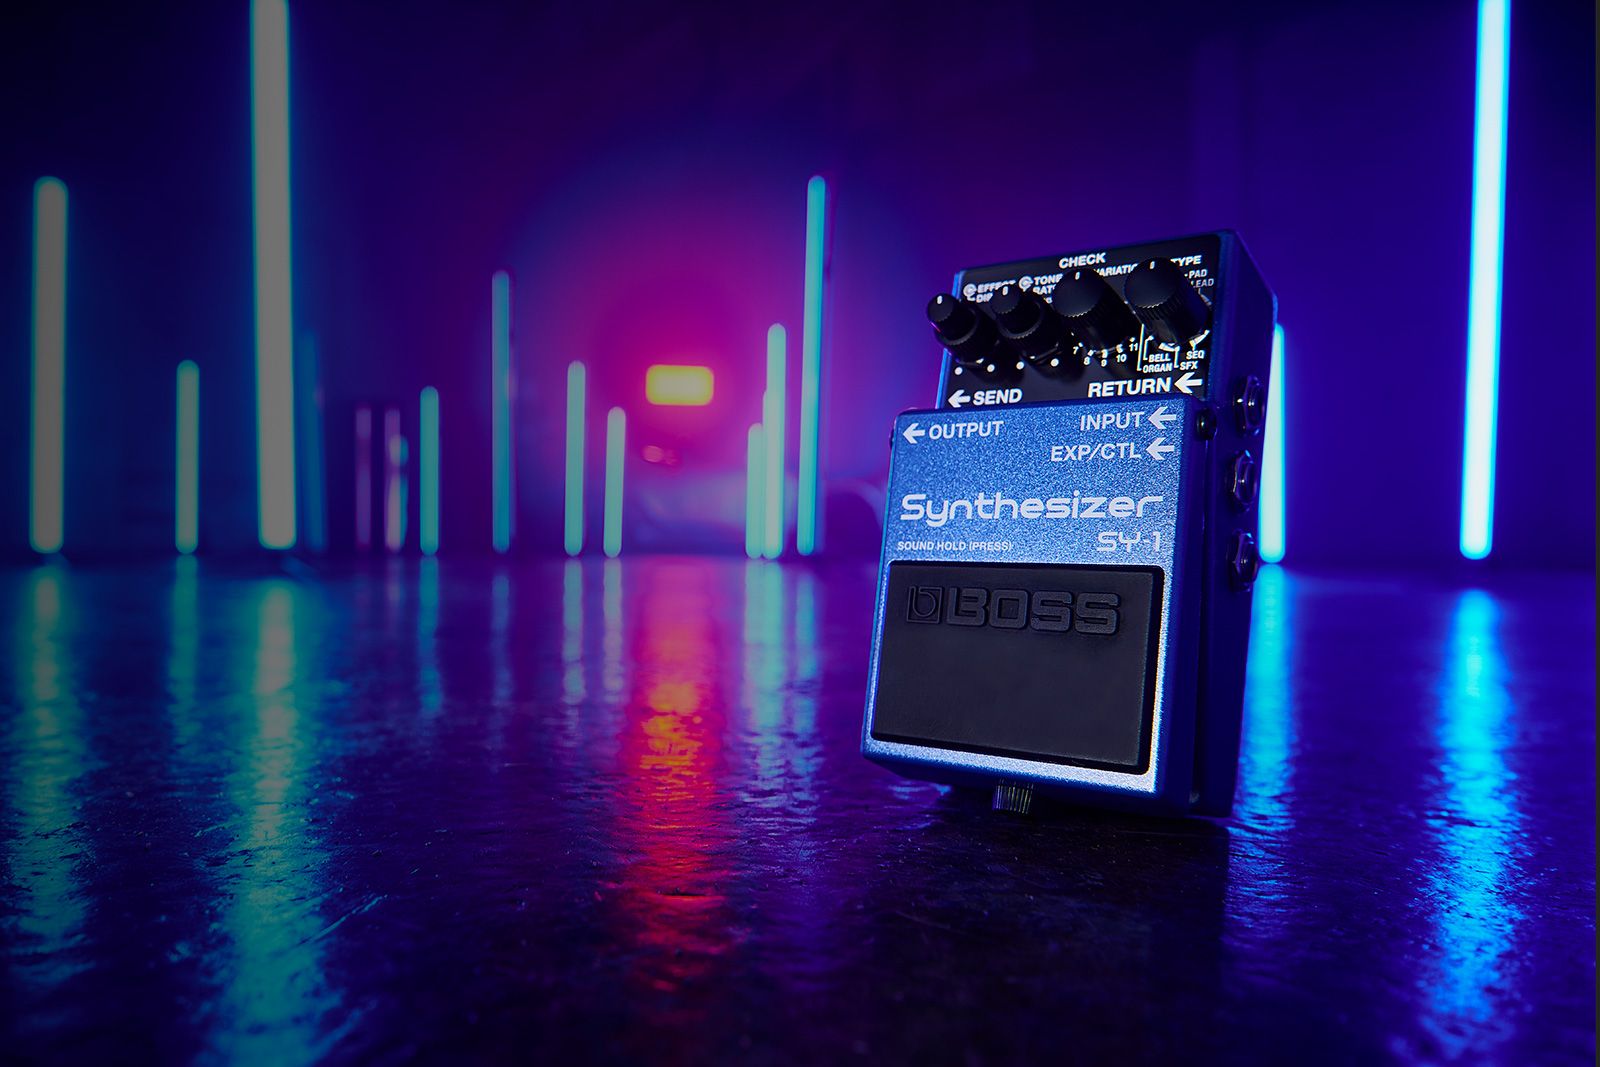 Boss Sy-1 Synthesizer - Modulation/chorus/flanger/phaser en tremolo effect pedaal - Variation 1